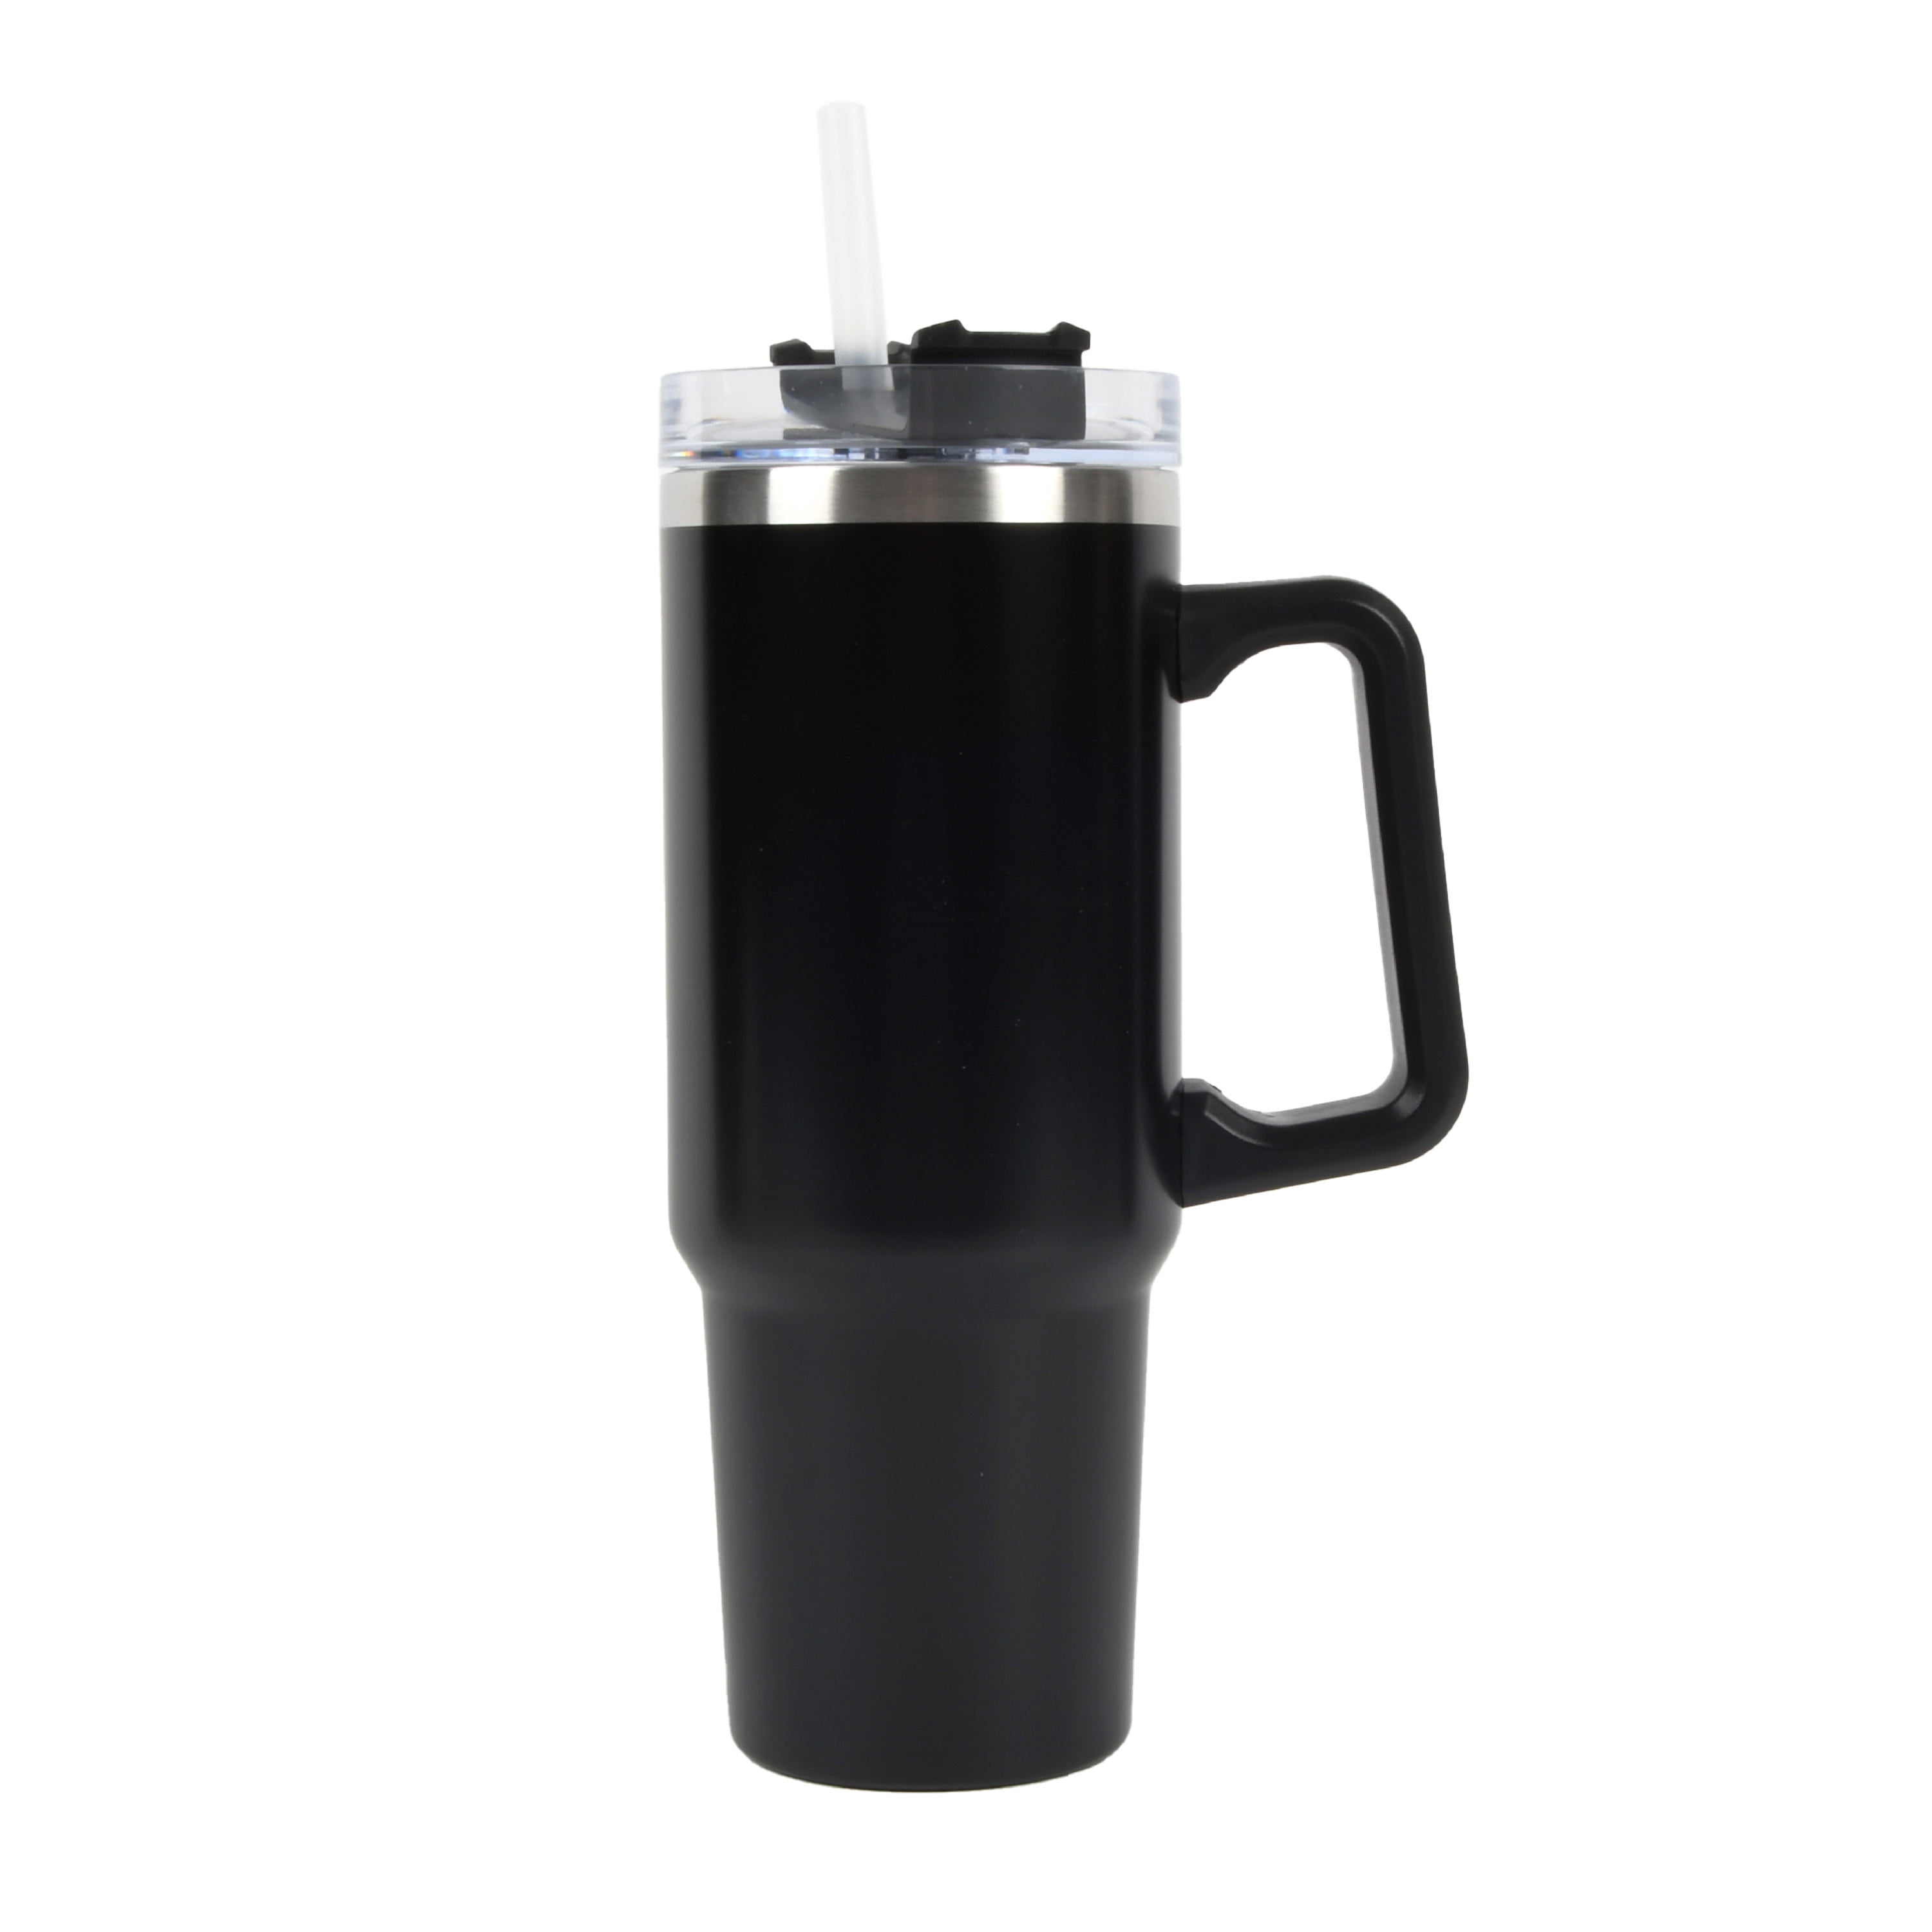 JIVILILM Snack tumbler with lid and straw, stainless steel insulated 2-in-1  travel coffee mug, water…See more JIVILILM Snack tumbler with lid and